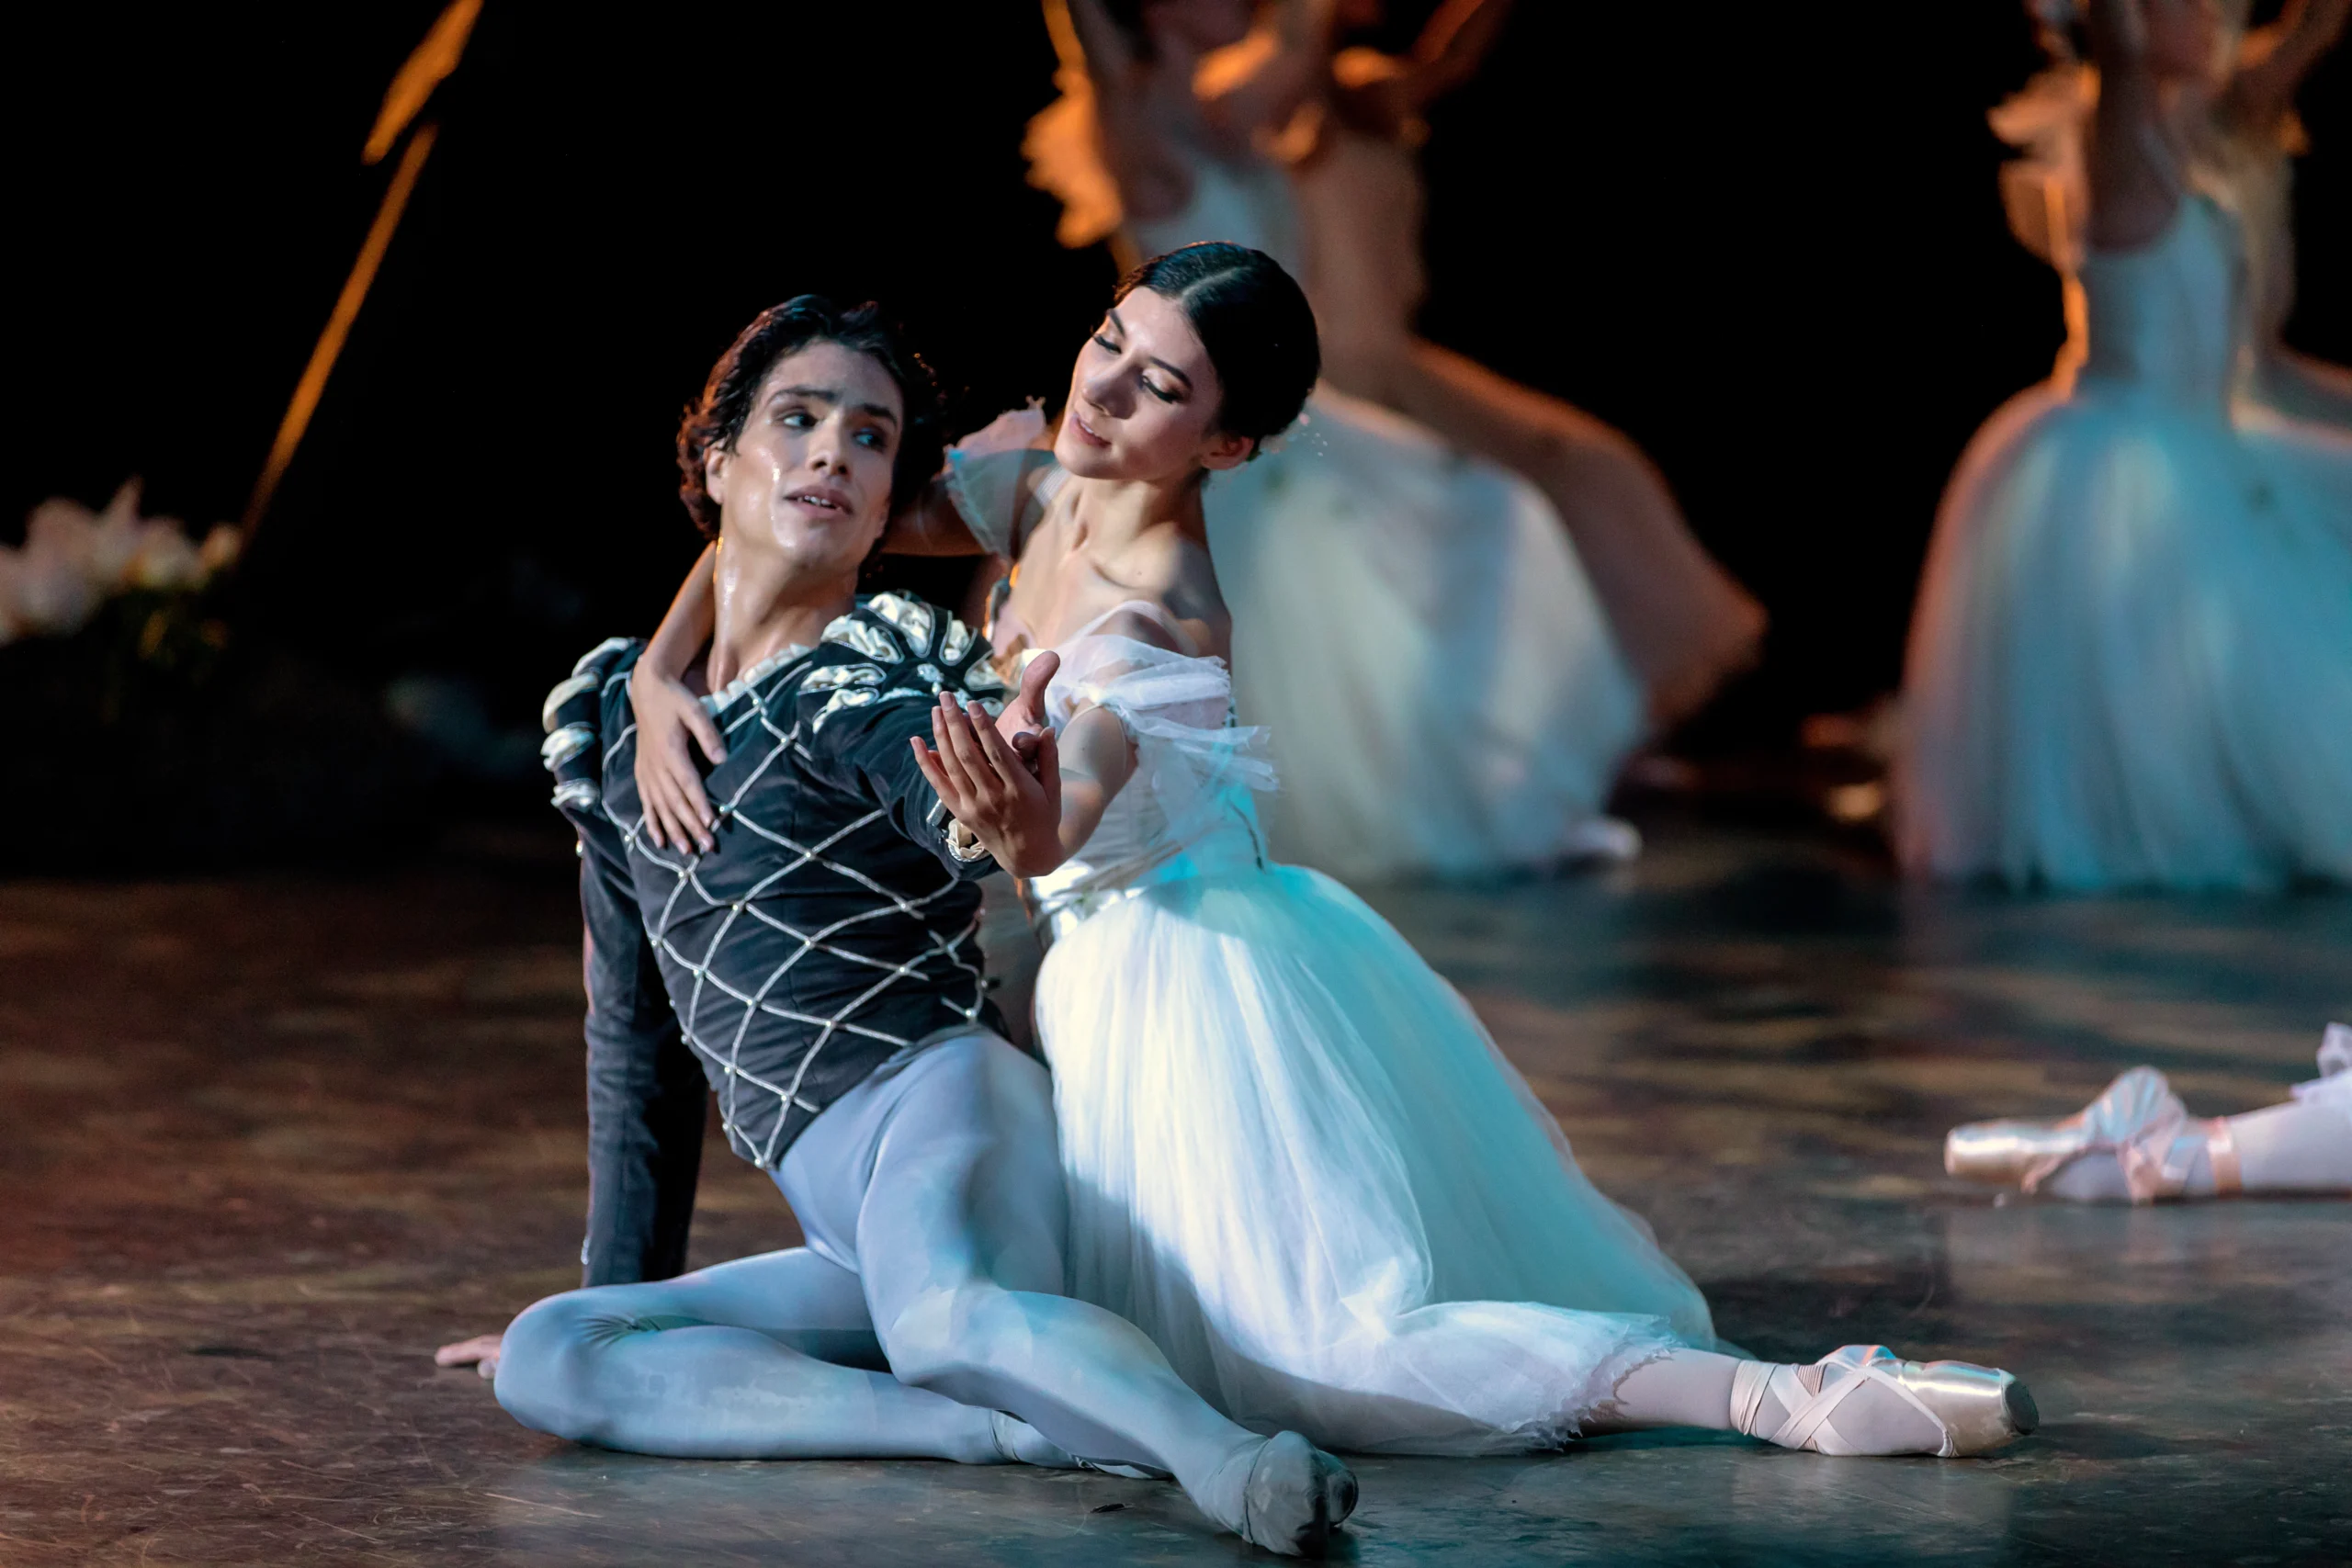 During a performance of the ballet Giselle, Esteban Hernández sits on the ground, legs extended to his left, and props himself up on his right hand. He looks desperately back at Jimison, who sits behind him, holding him around his right shoulder and under his extended left hand. Jimison wears a long, white Romantic tutu, tights and pointe shoes, while Hernandez wears gray tights and a dark gray, velvet tunic.